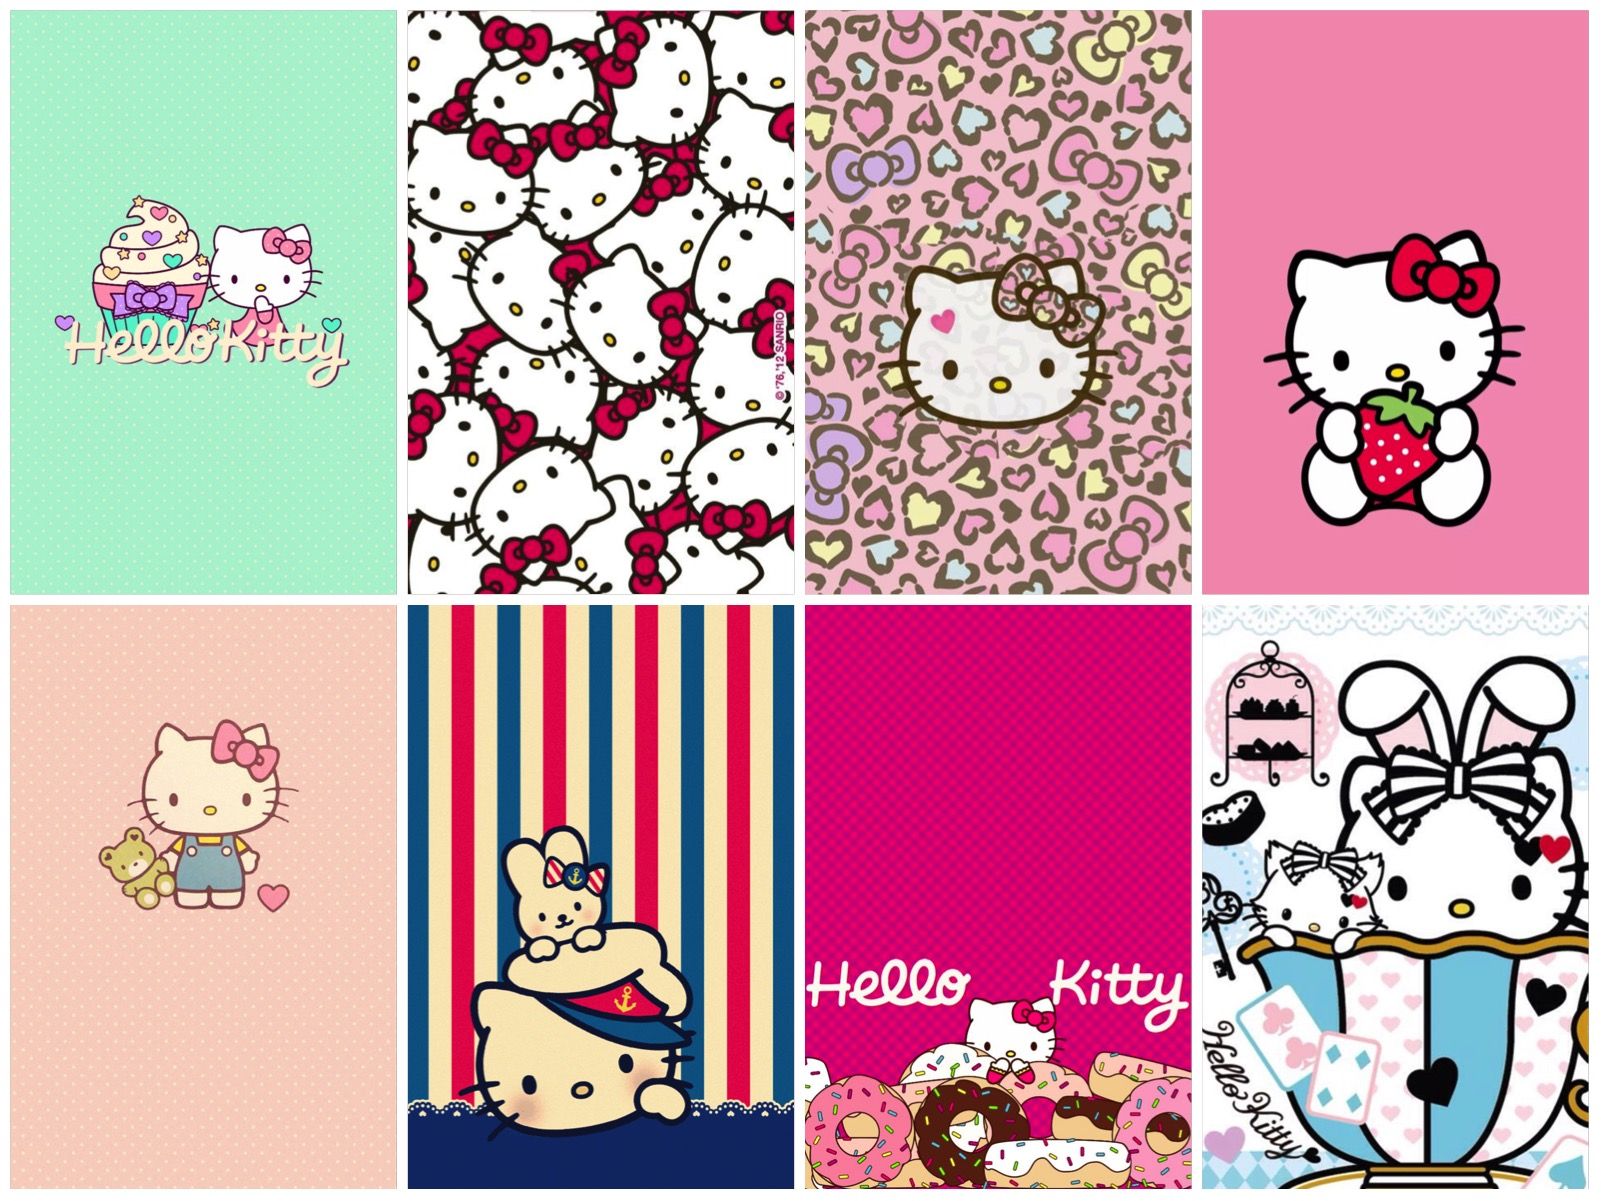 Cute Hello Kitty Wallpapers for Mobile - Cute Backgrounds